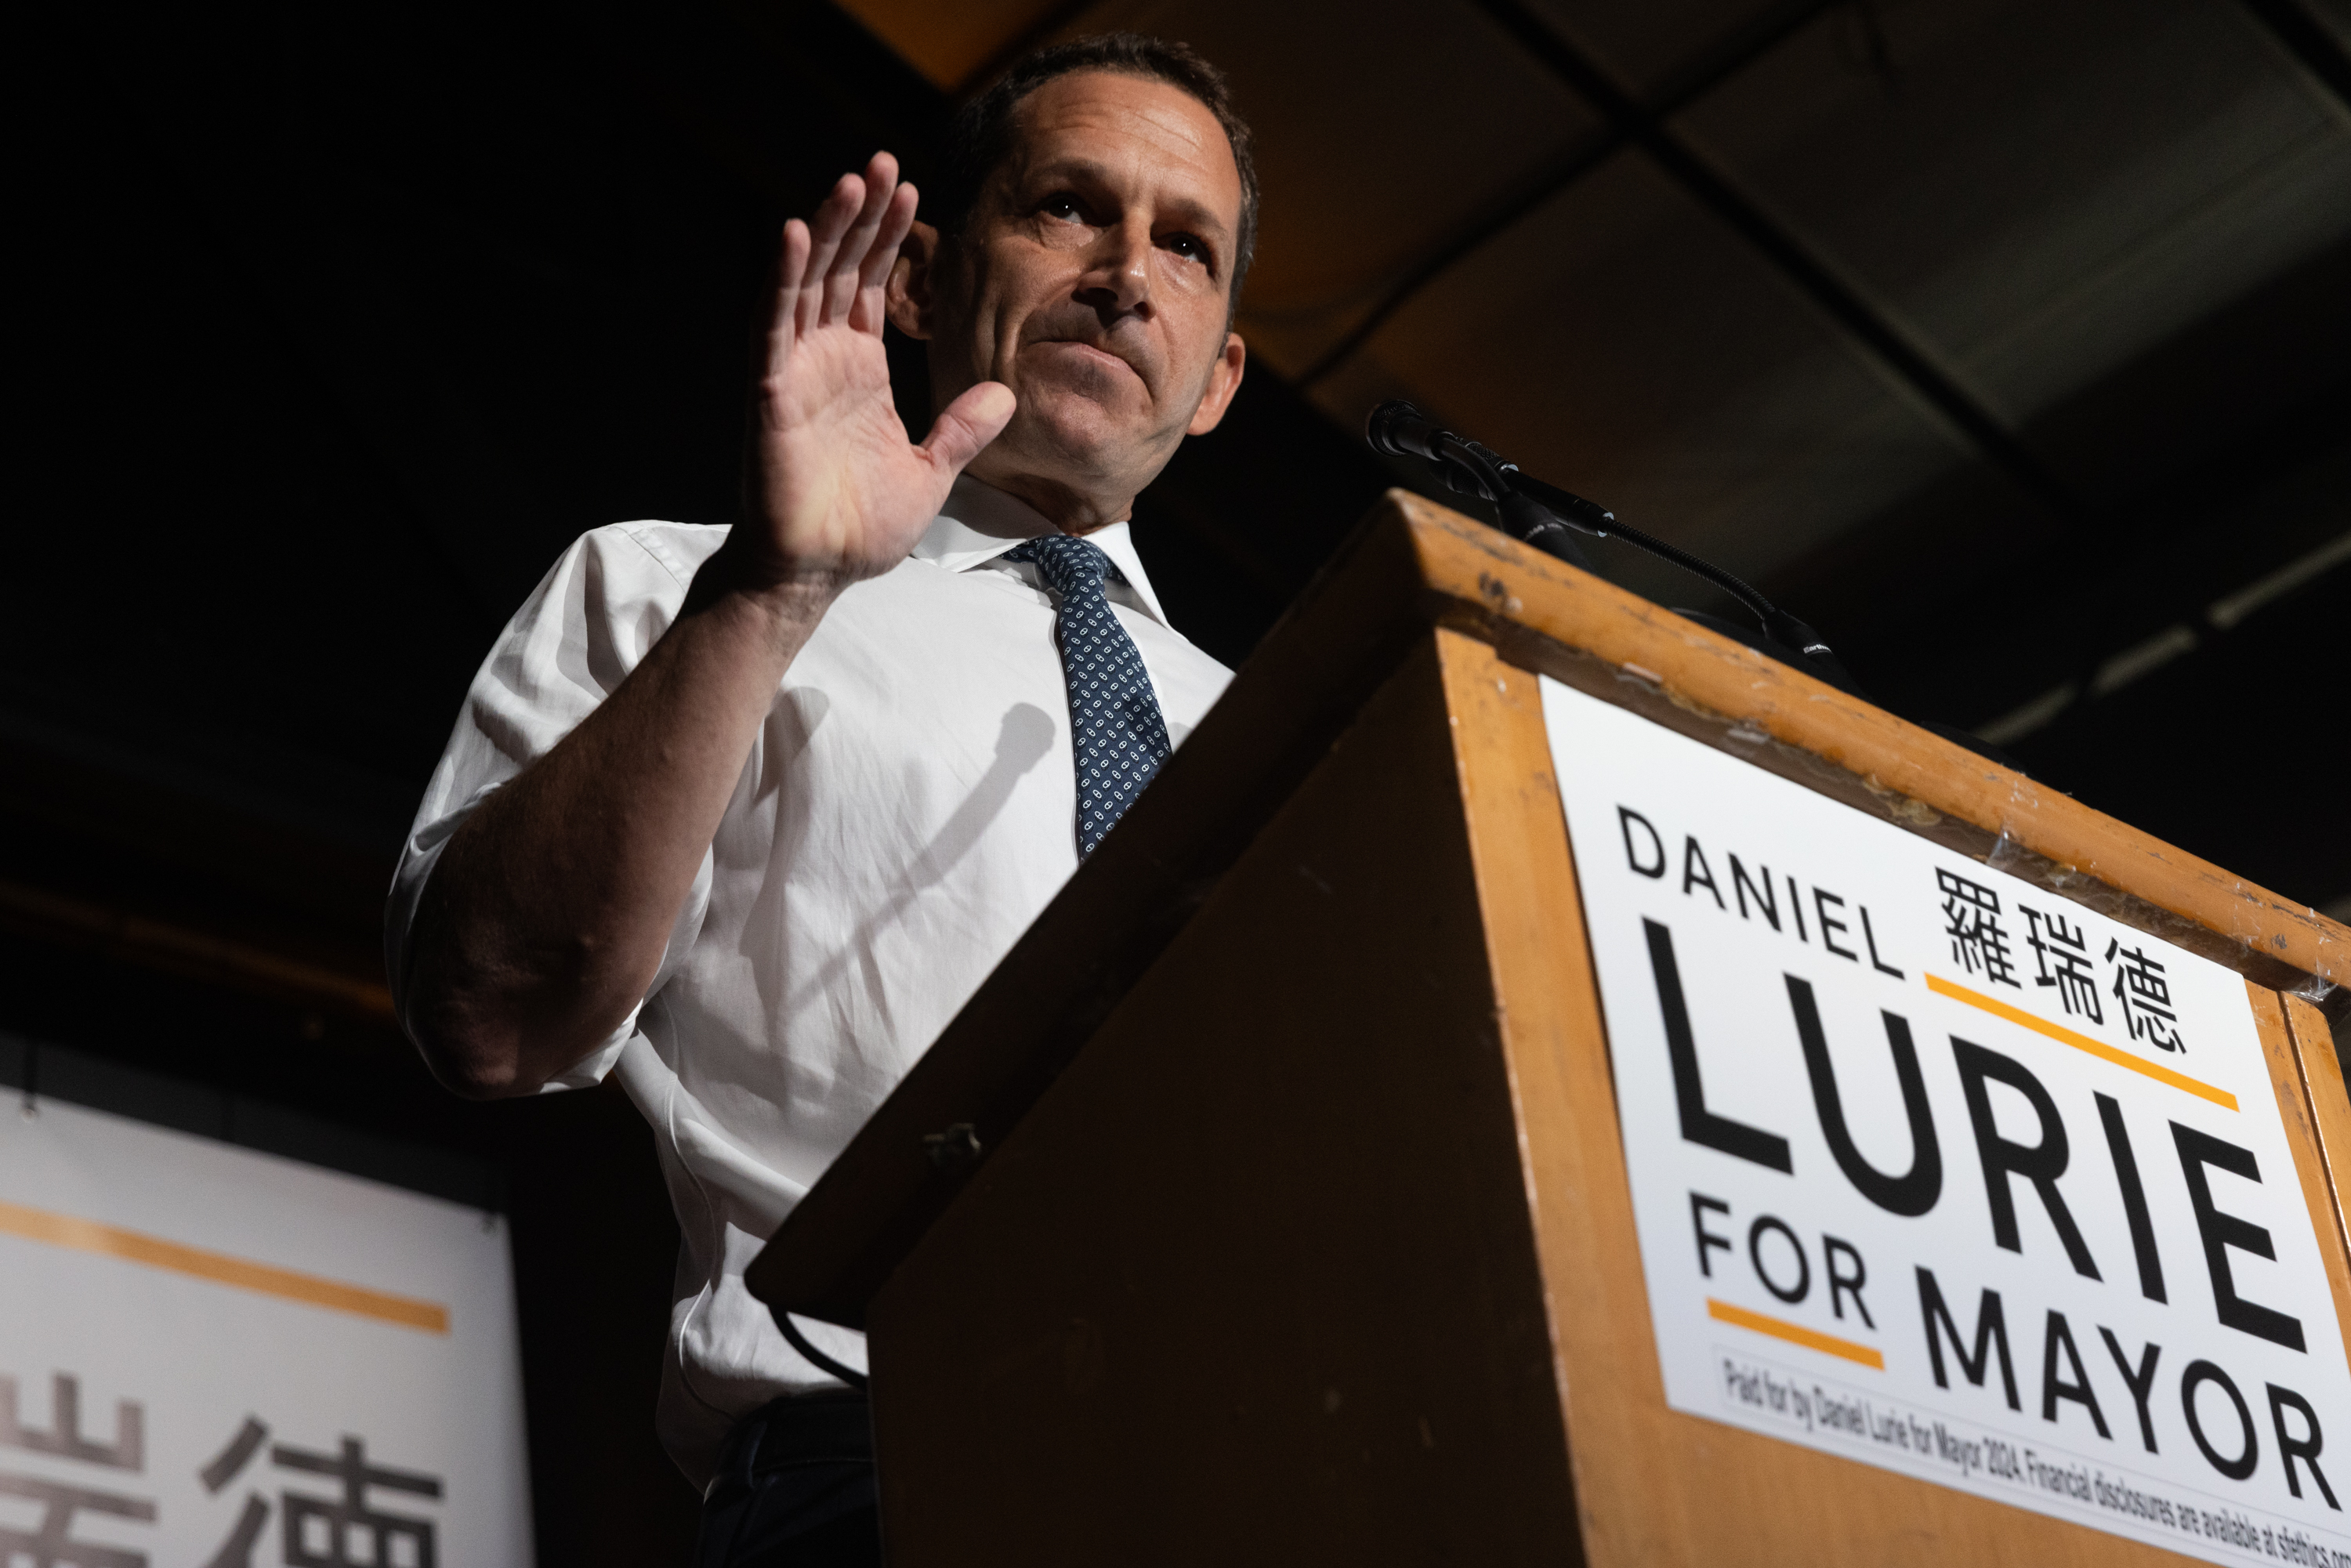 Why Is Daniel Lurie Running for San Francisco Mayor? He Says City Has Leadership ‘Crisis’